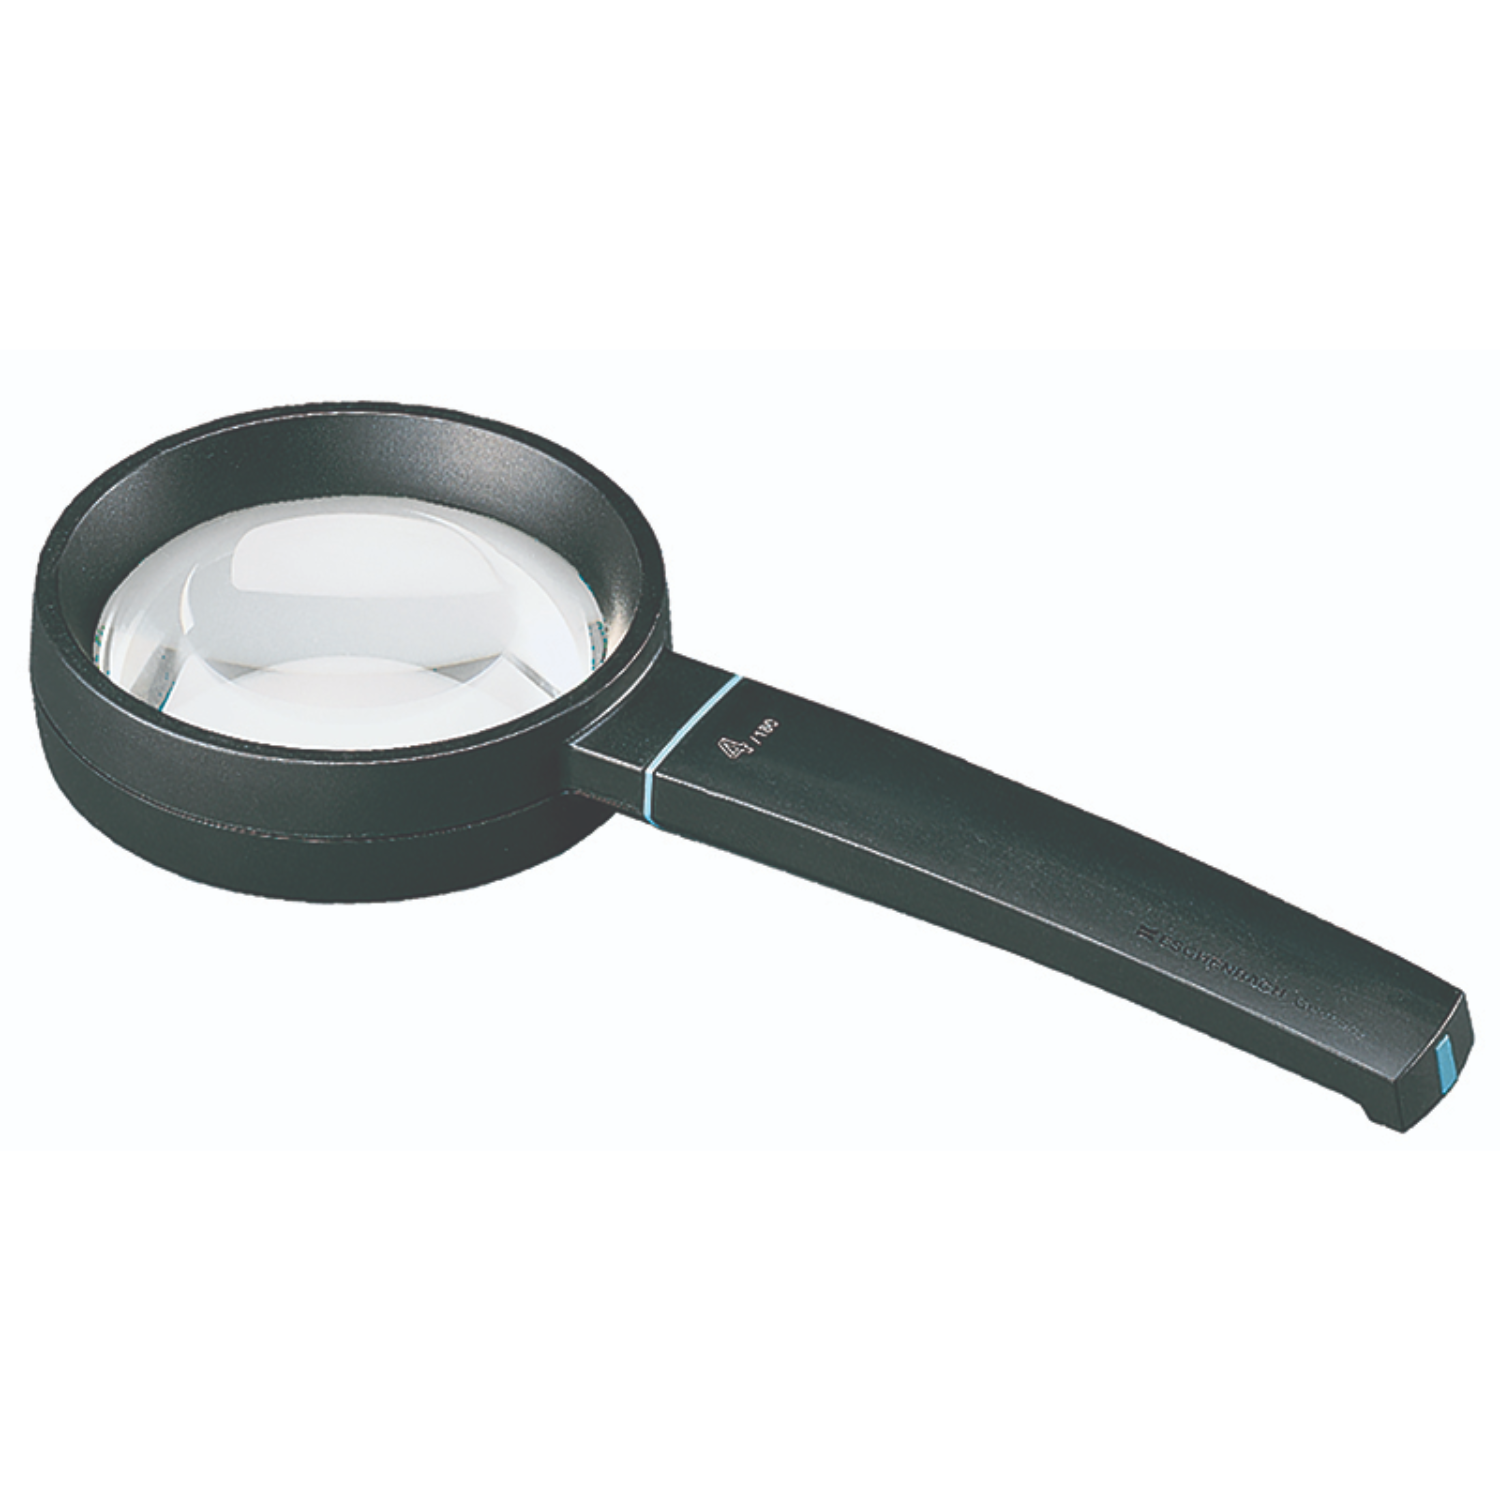 Image of the Eschenbach 4x Aspheric II Round Hand-held Magnifier.